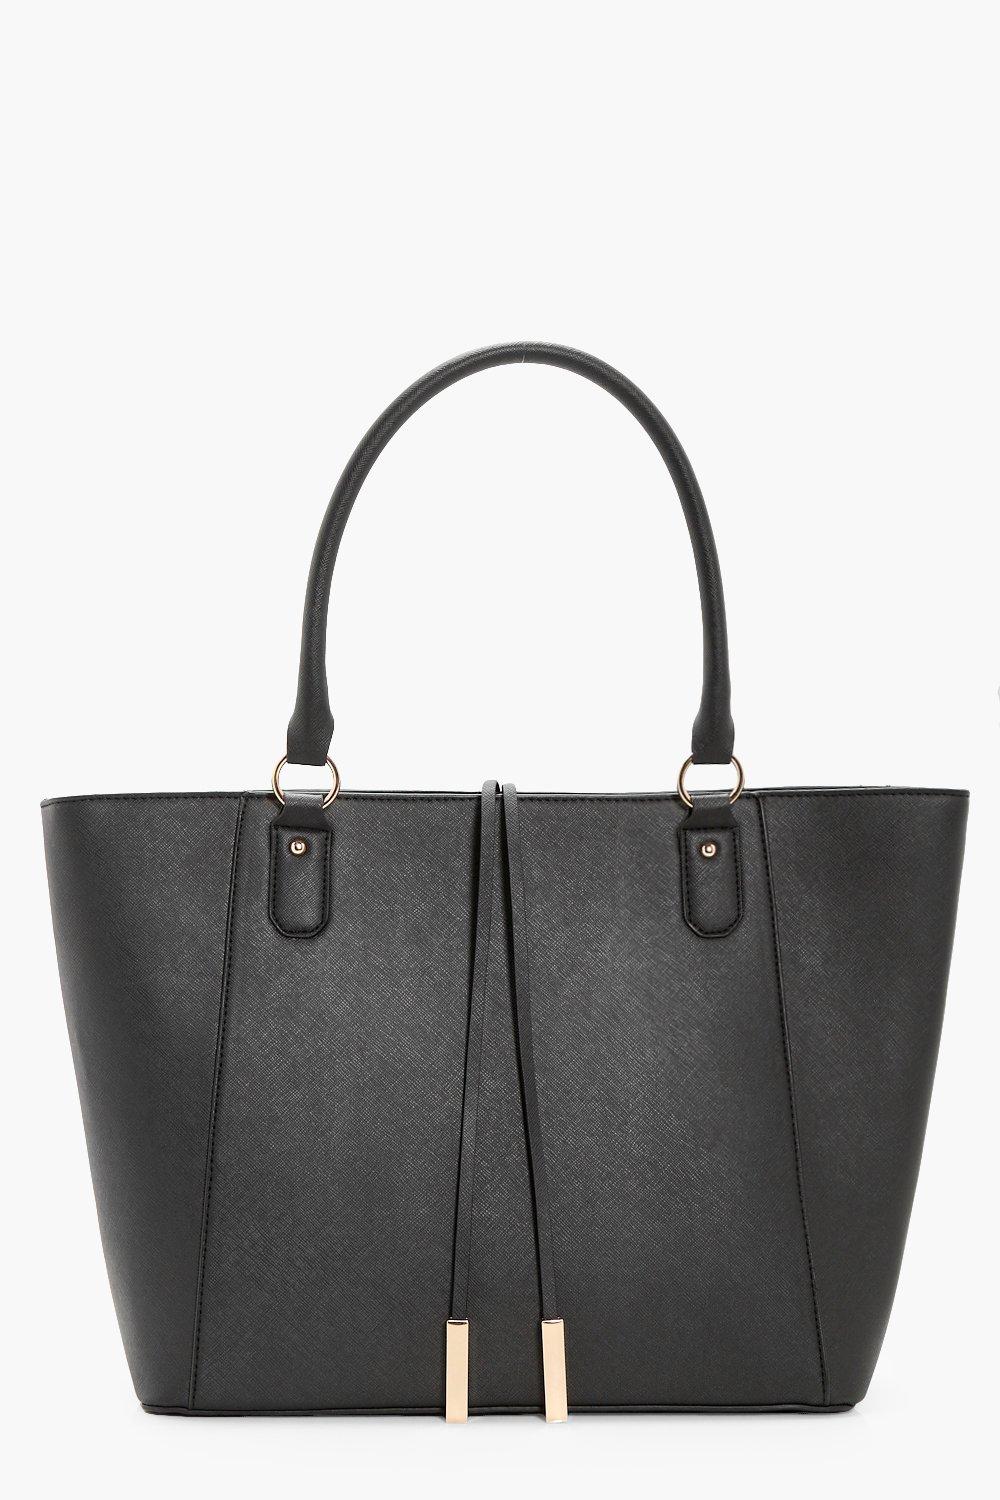 Womens Structured Cross Hatch Tote Bag - Black - One Size, Black